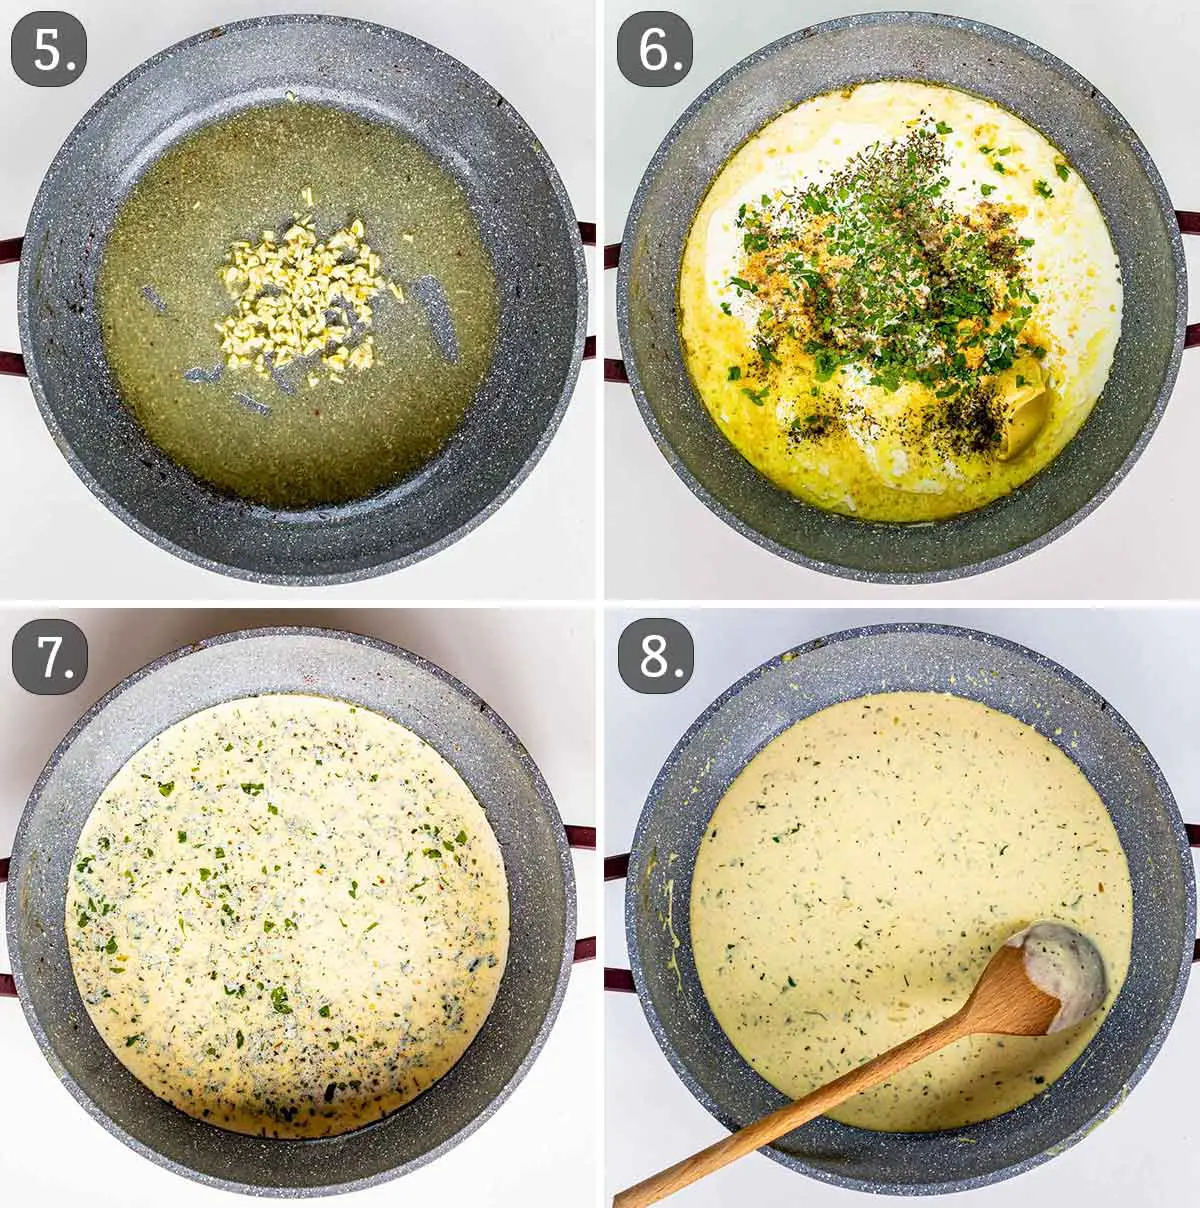 detailed process shots showing how to make mustard sauce.